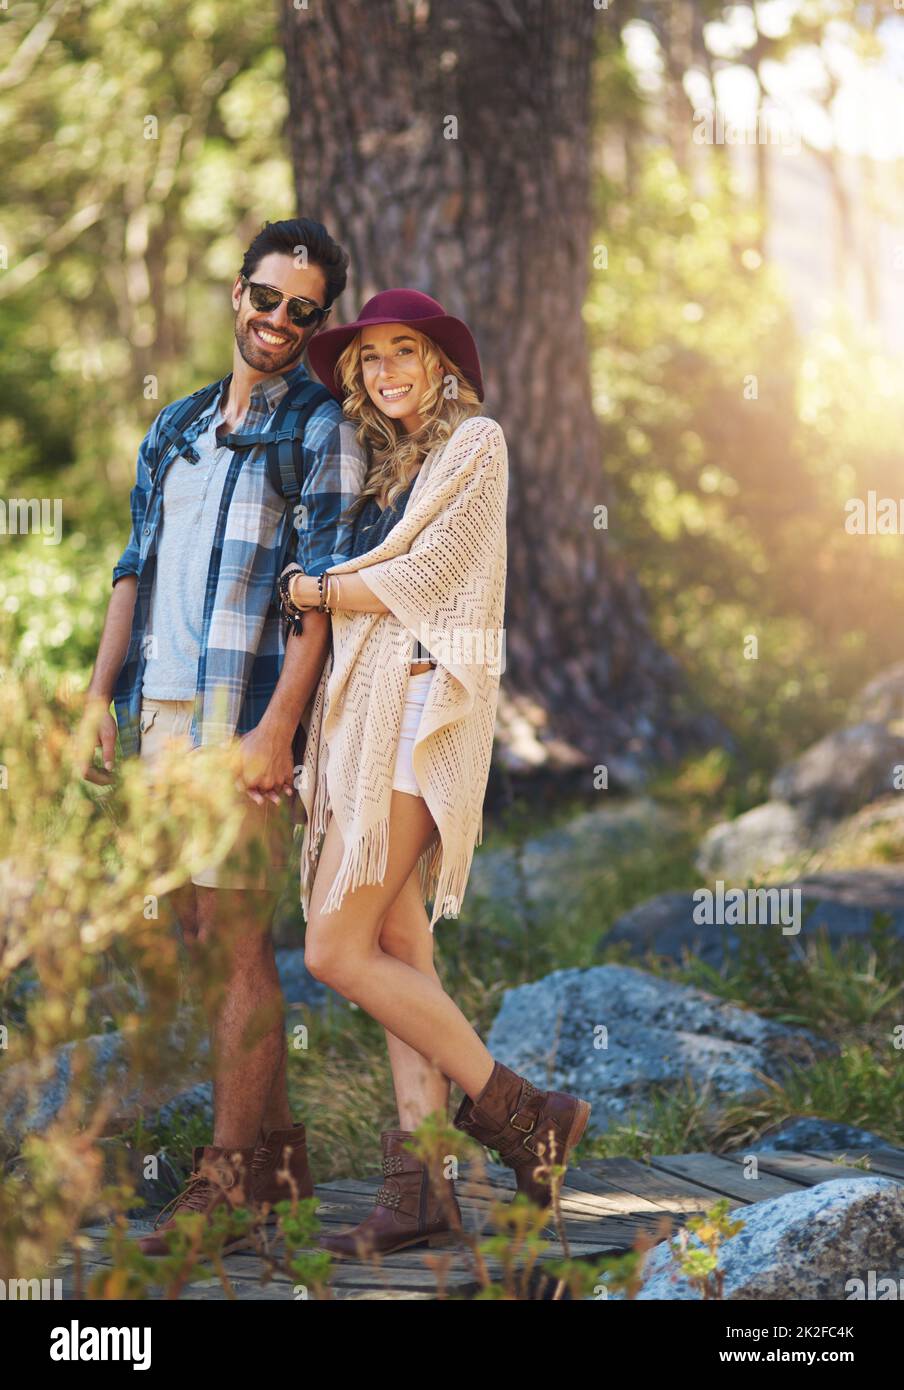 We in love with nature. Full length portrait of an affectionate young couple during a hike. Stock Photo